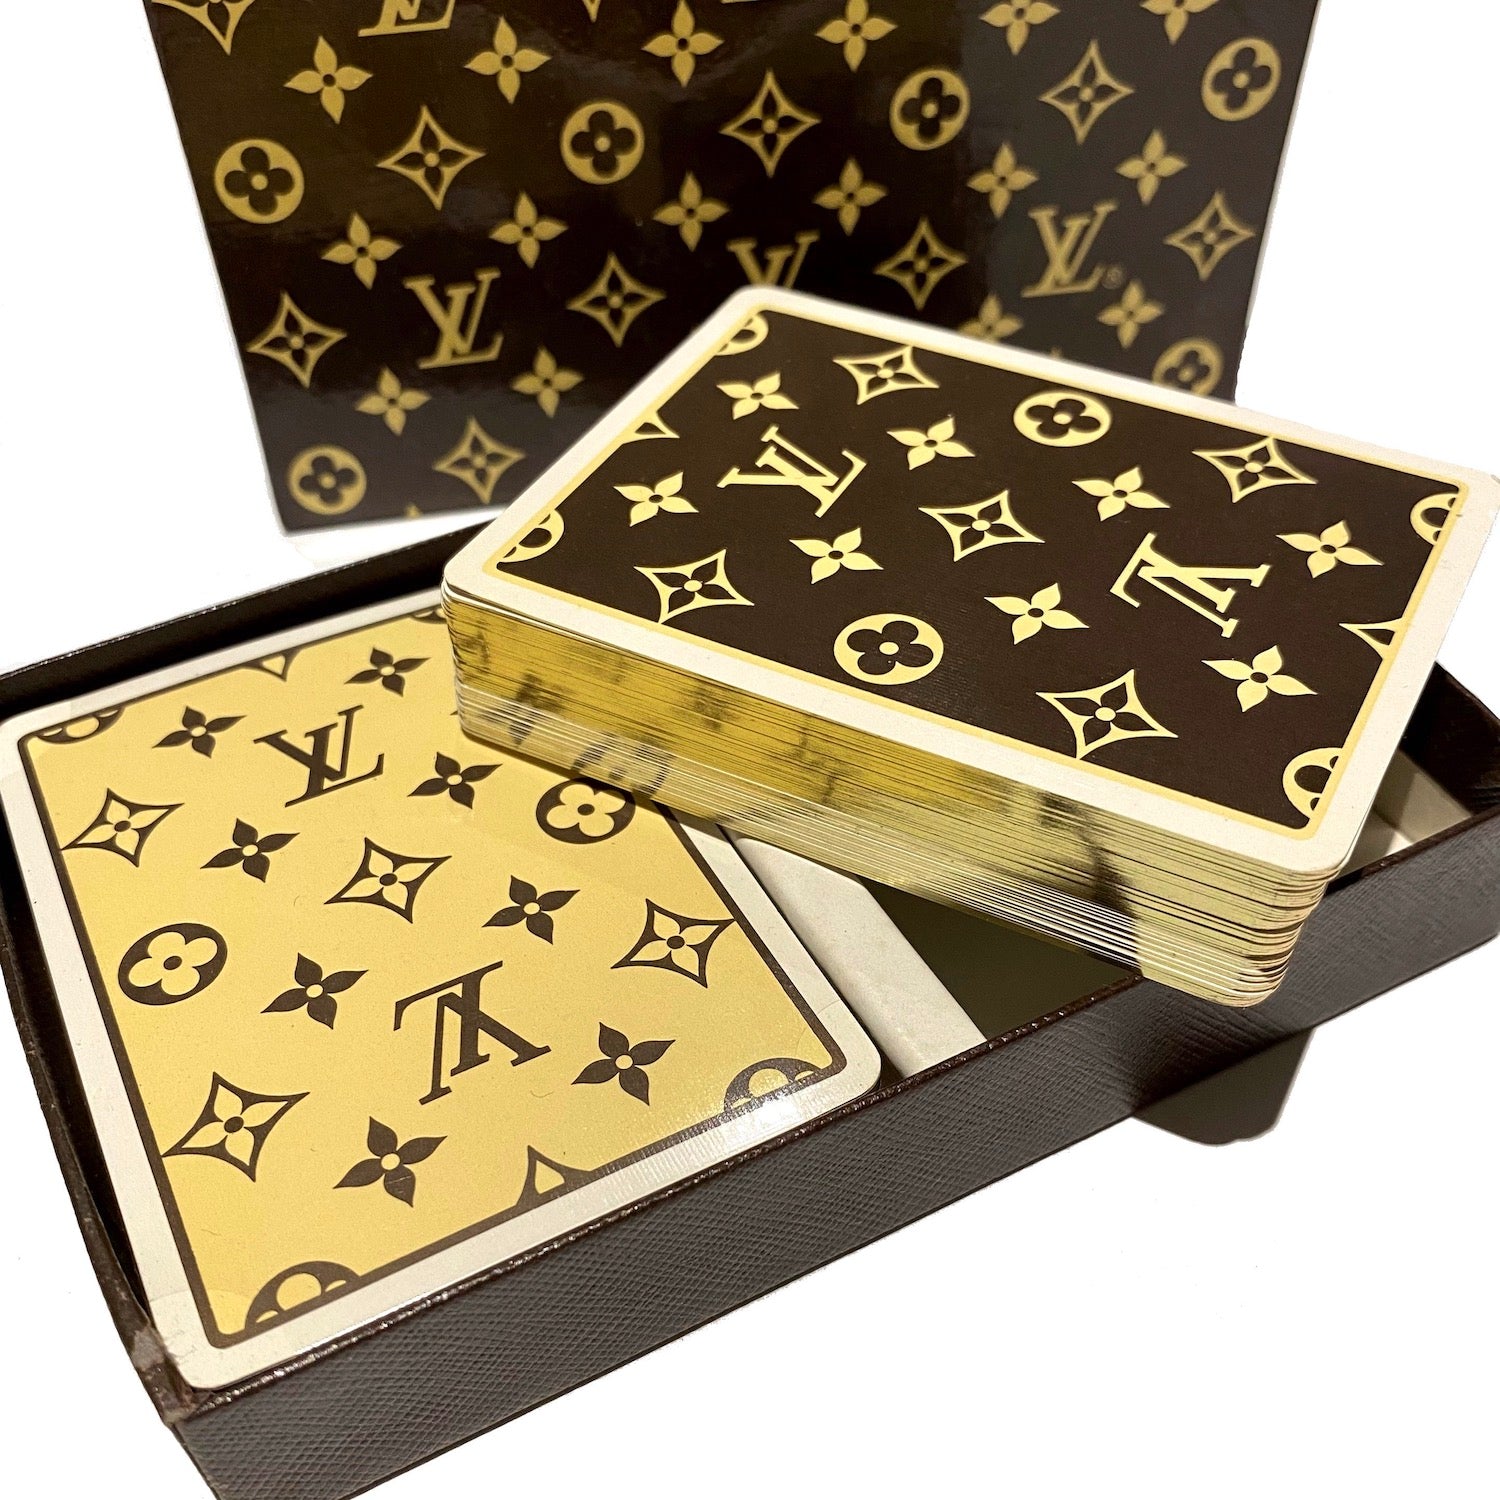 Te Plus Te Two sets of Louis Vuitton vintage playing cards with monogram motif and gilt edges. Includes box and bridge contrat card.